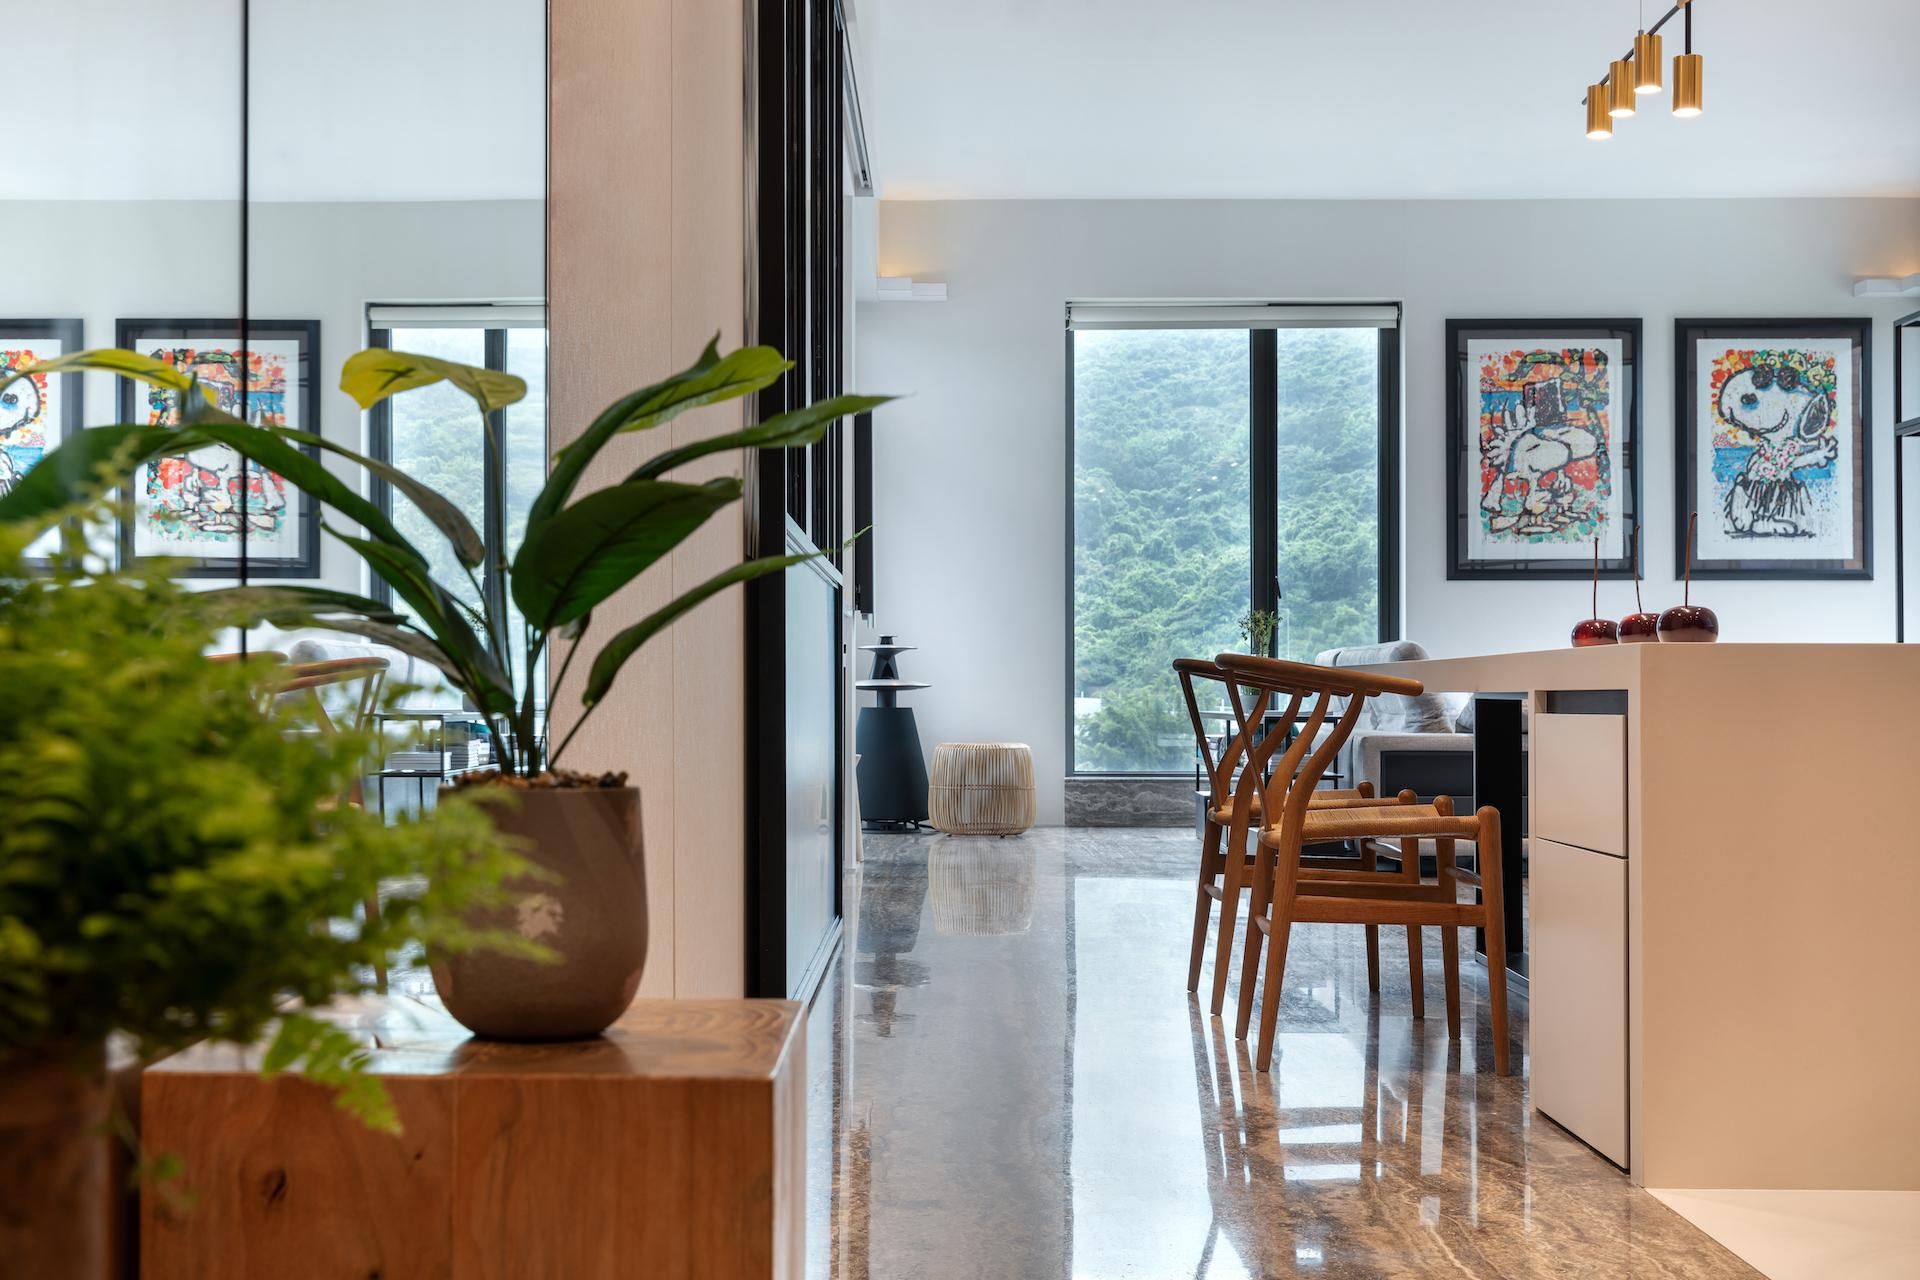 A 2,400-sq.ft. Duplex in Tsuen Wan Makes the Kitchen the Heart of the Home